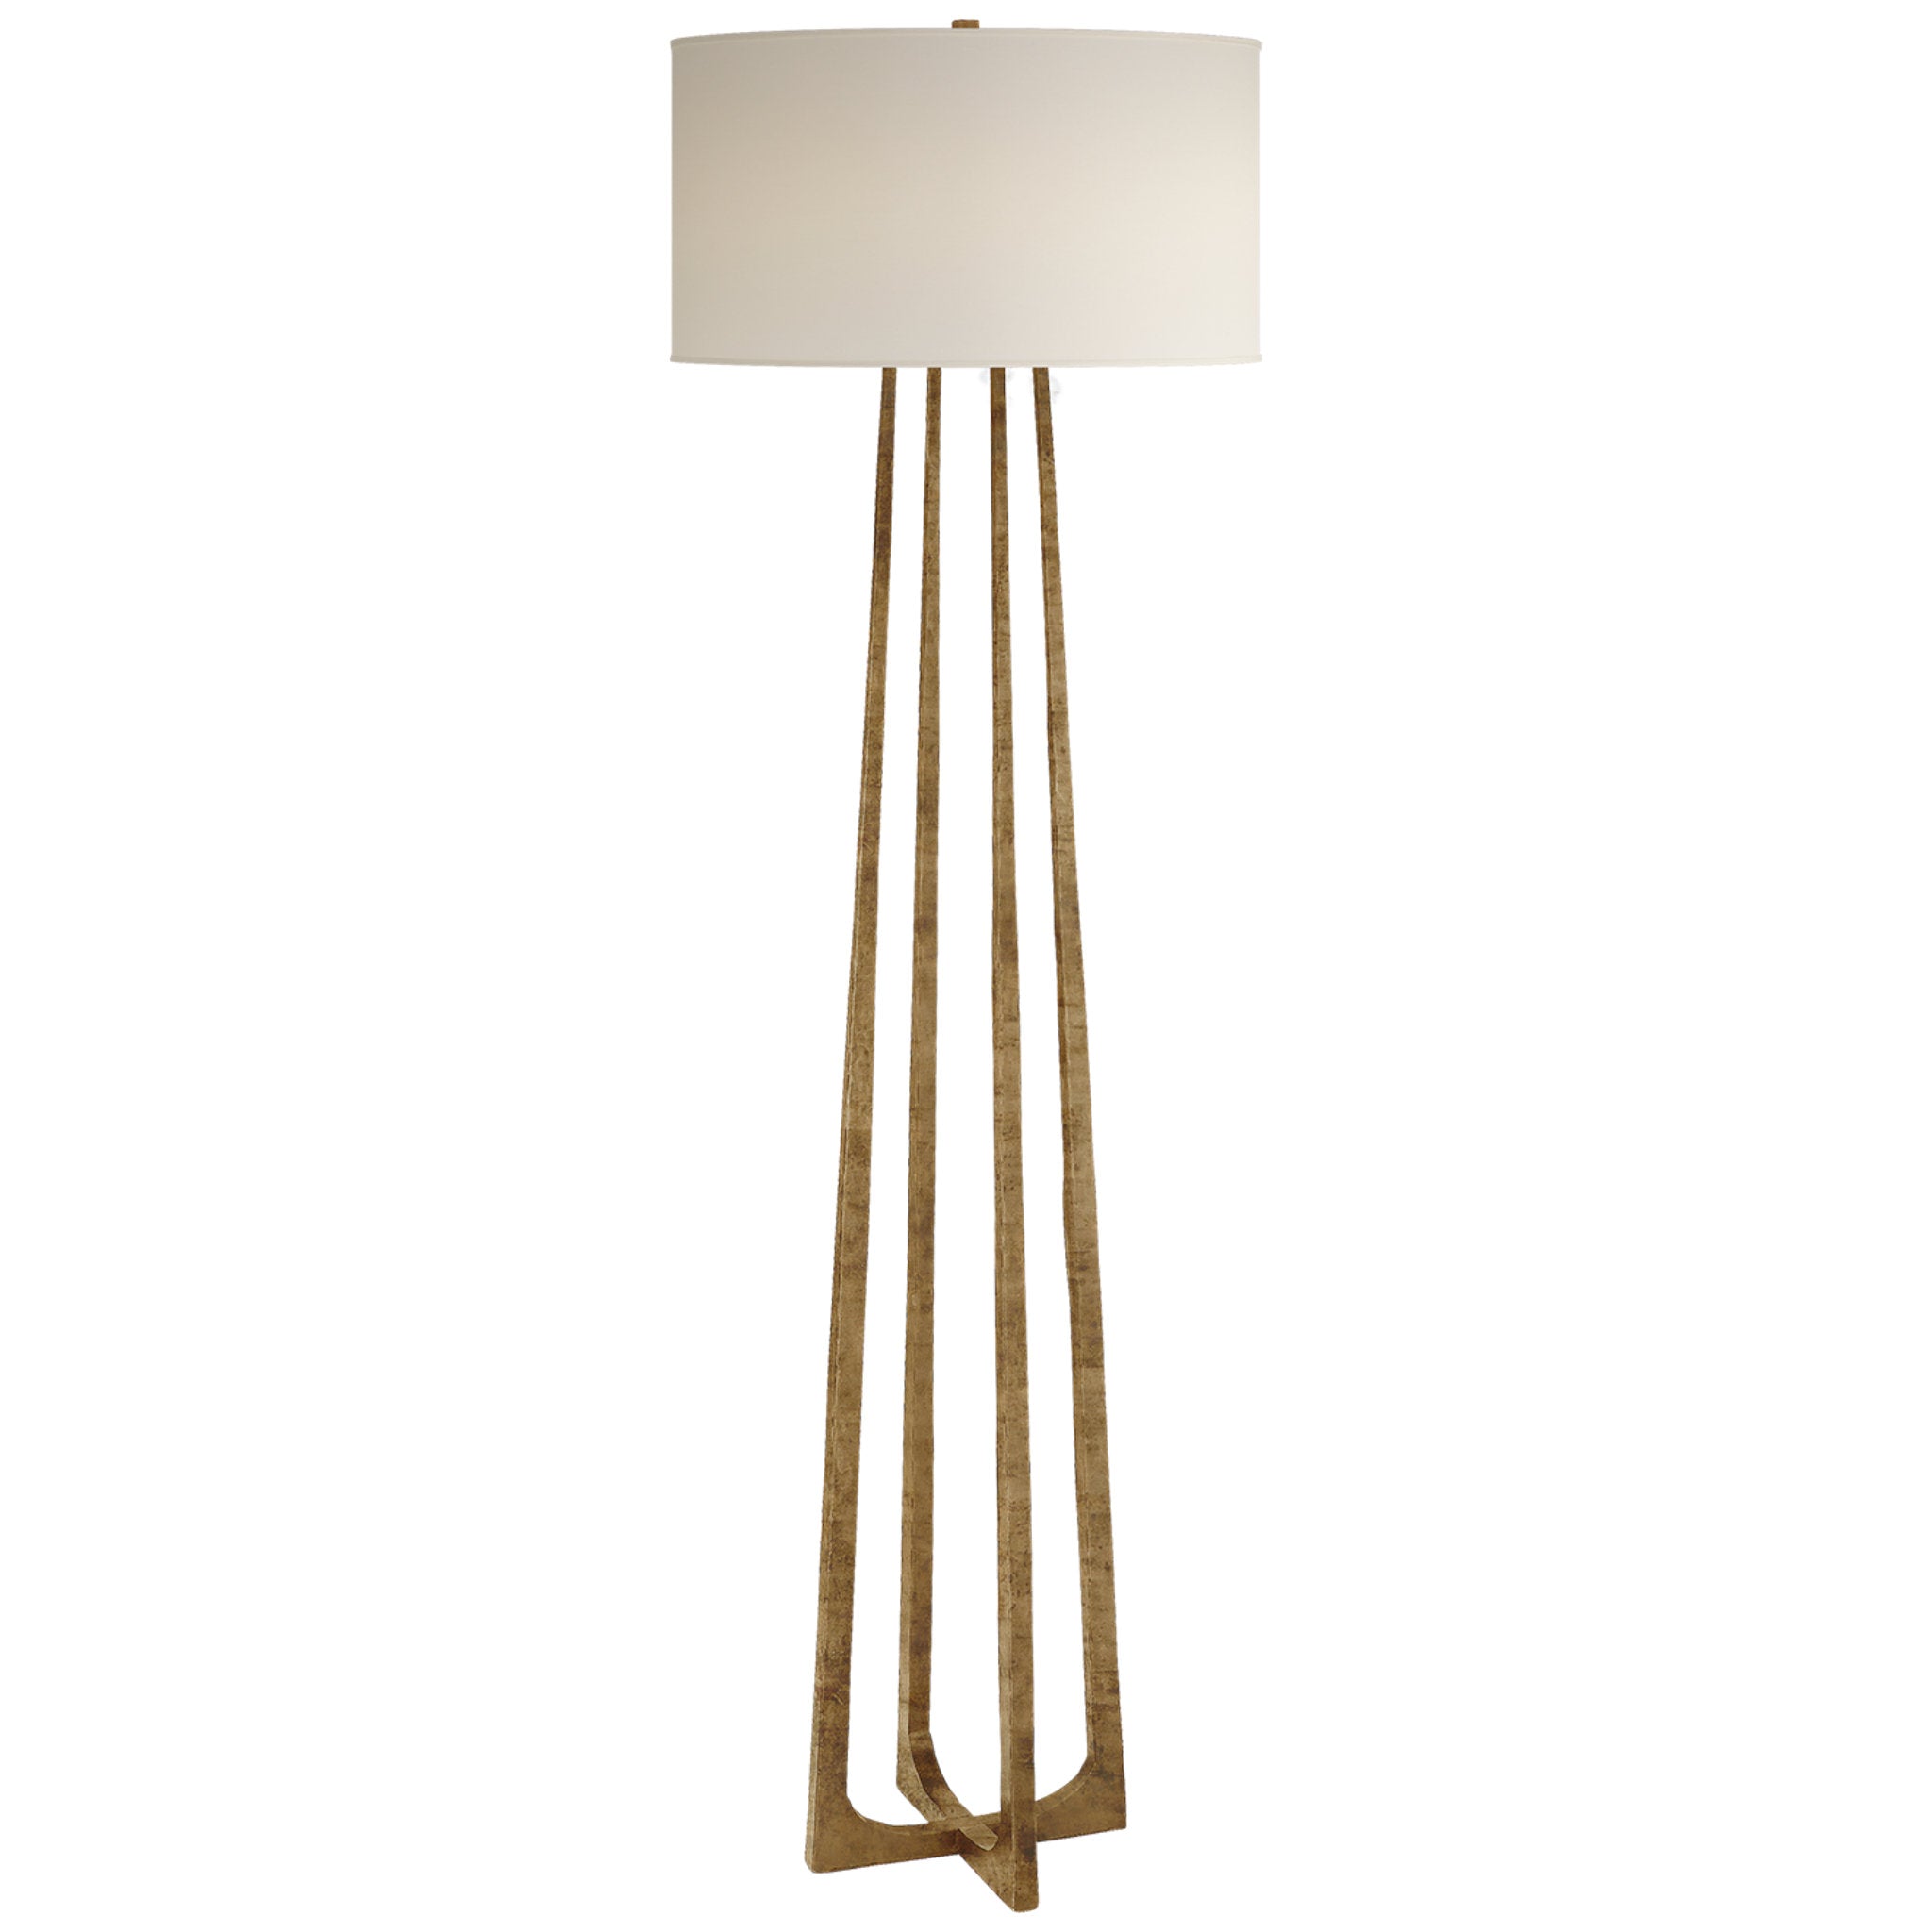 Ian K. Fowler Scala Large Hand-Forged Floor Lamp in Gilded Iron with Natural Percale Shade